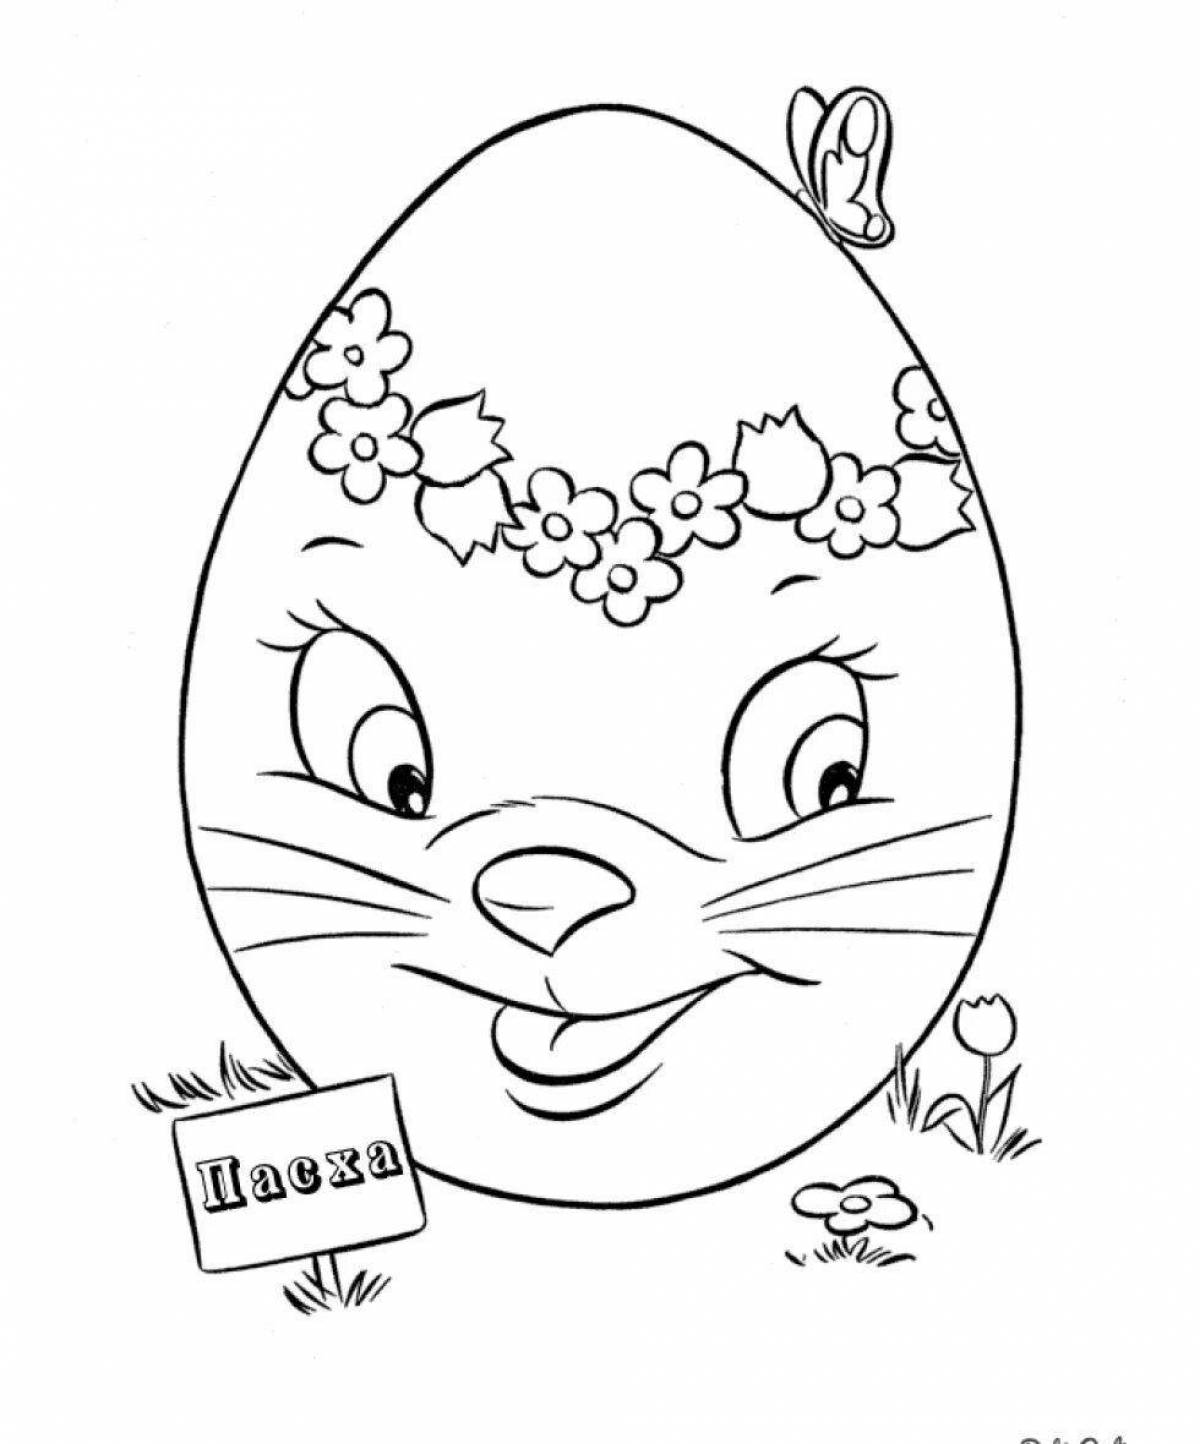 Humorous Easter egg coloring